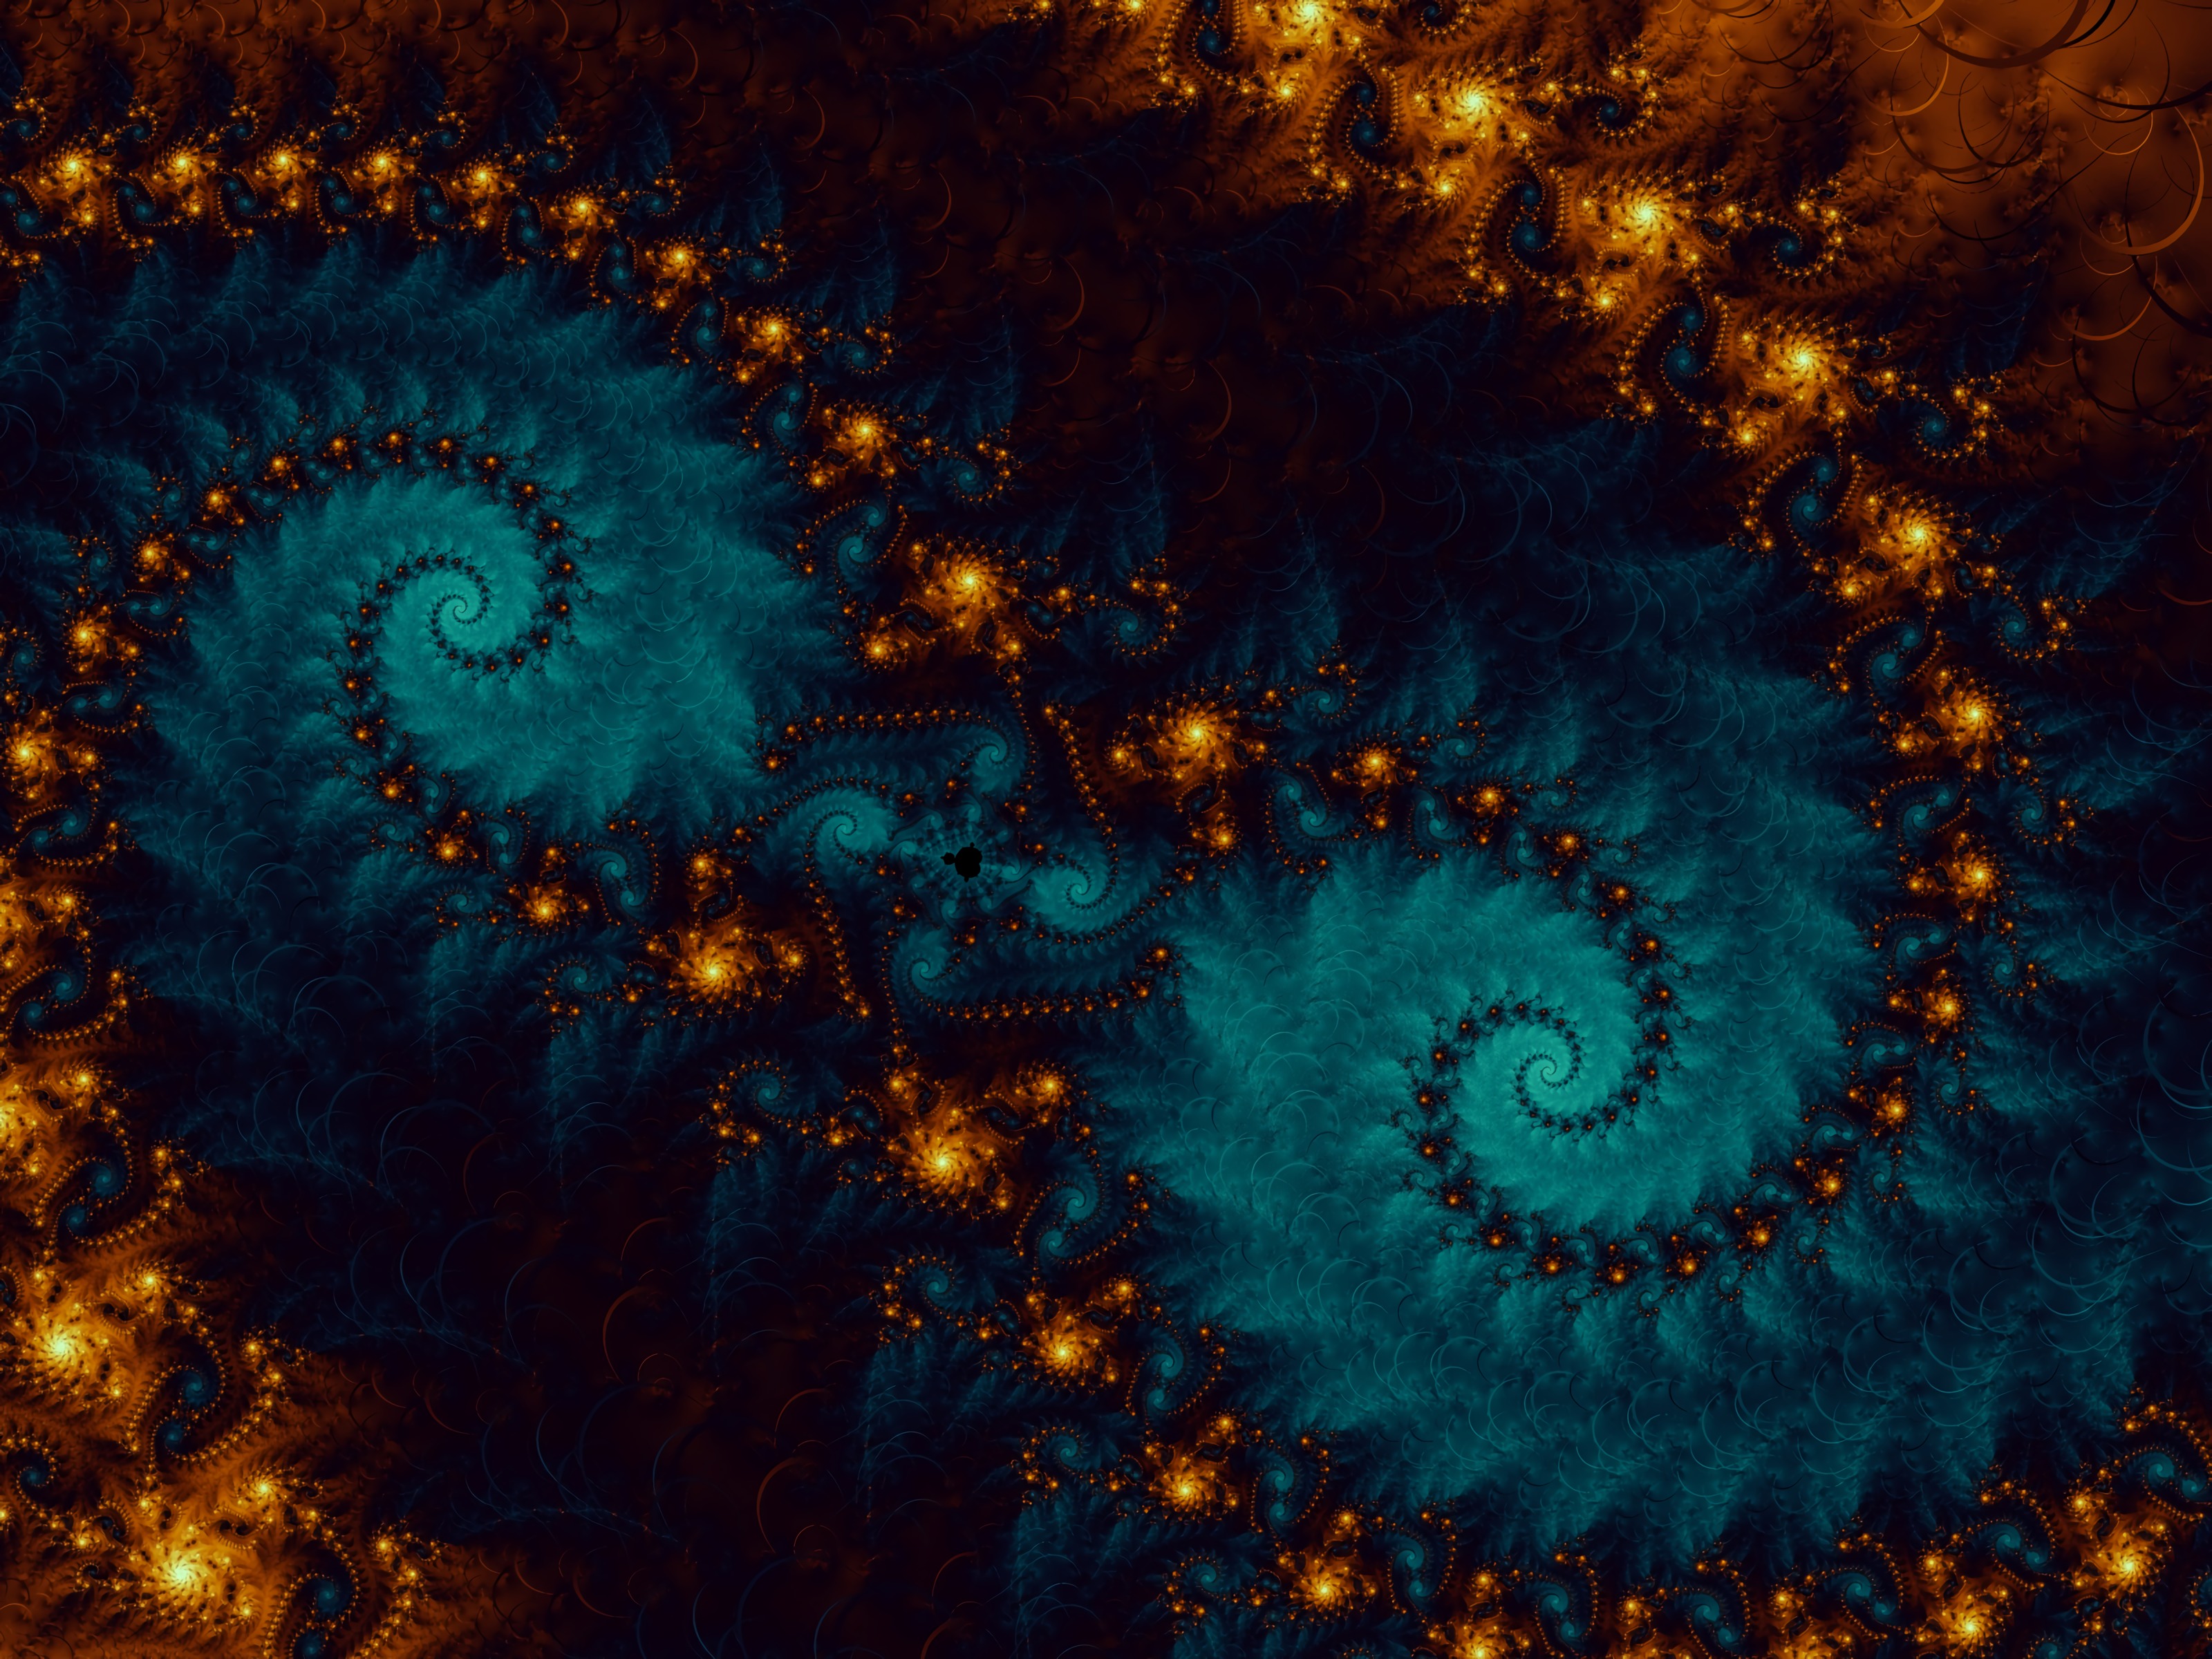 fractal, swirling, abstract, pattern, spiral, involute images